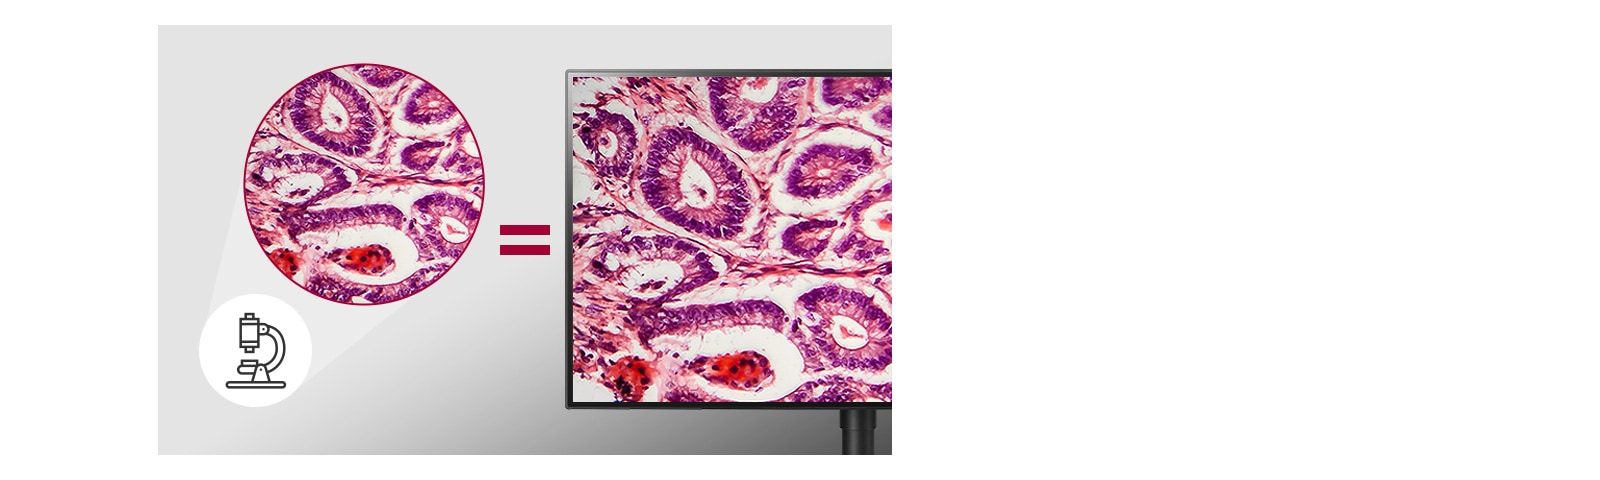 pathology mode offering imaging results as detailed and accurately colored as seen under a microscope